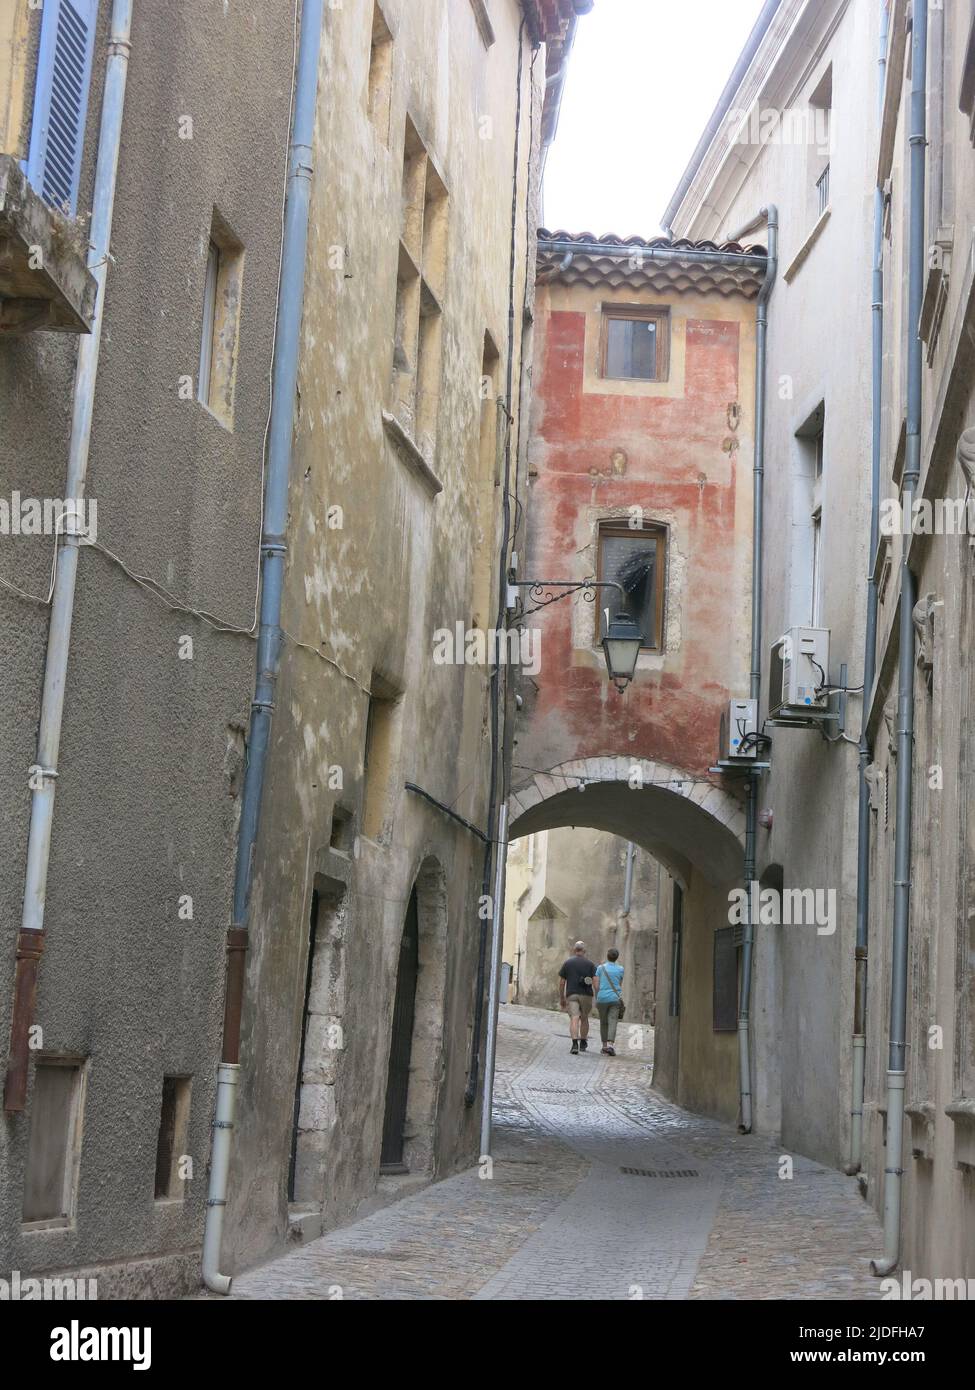 Follow a heritage trail through the narrow, winding streets of tall buildings in the quaint old town of Viviers, France's smallest city. Stock Photo